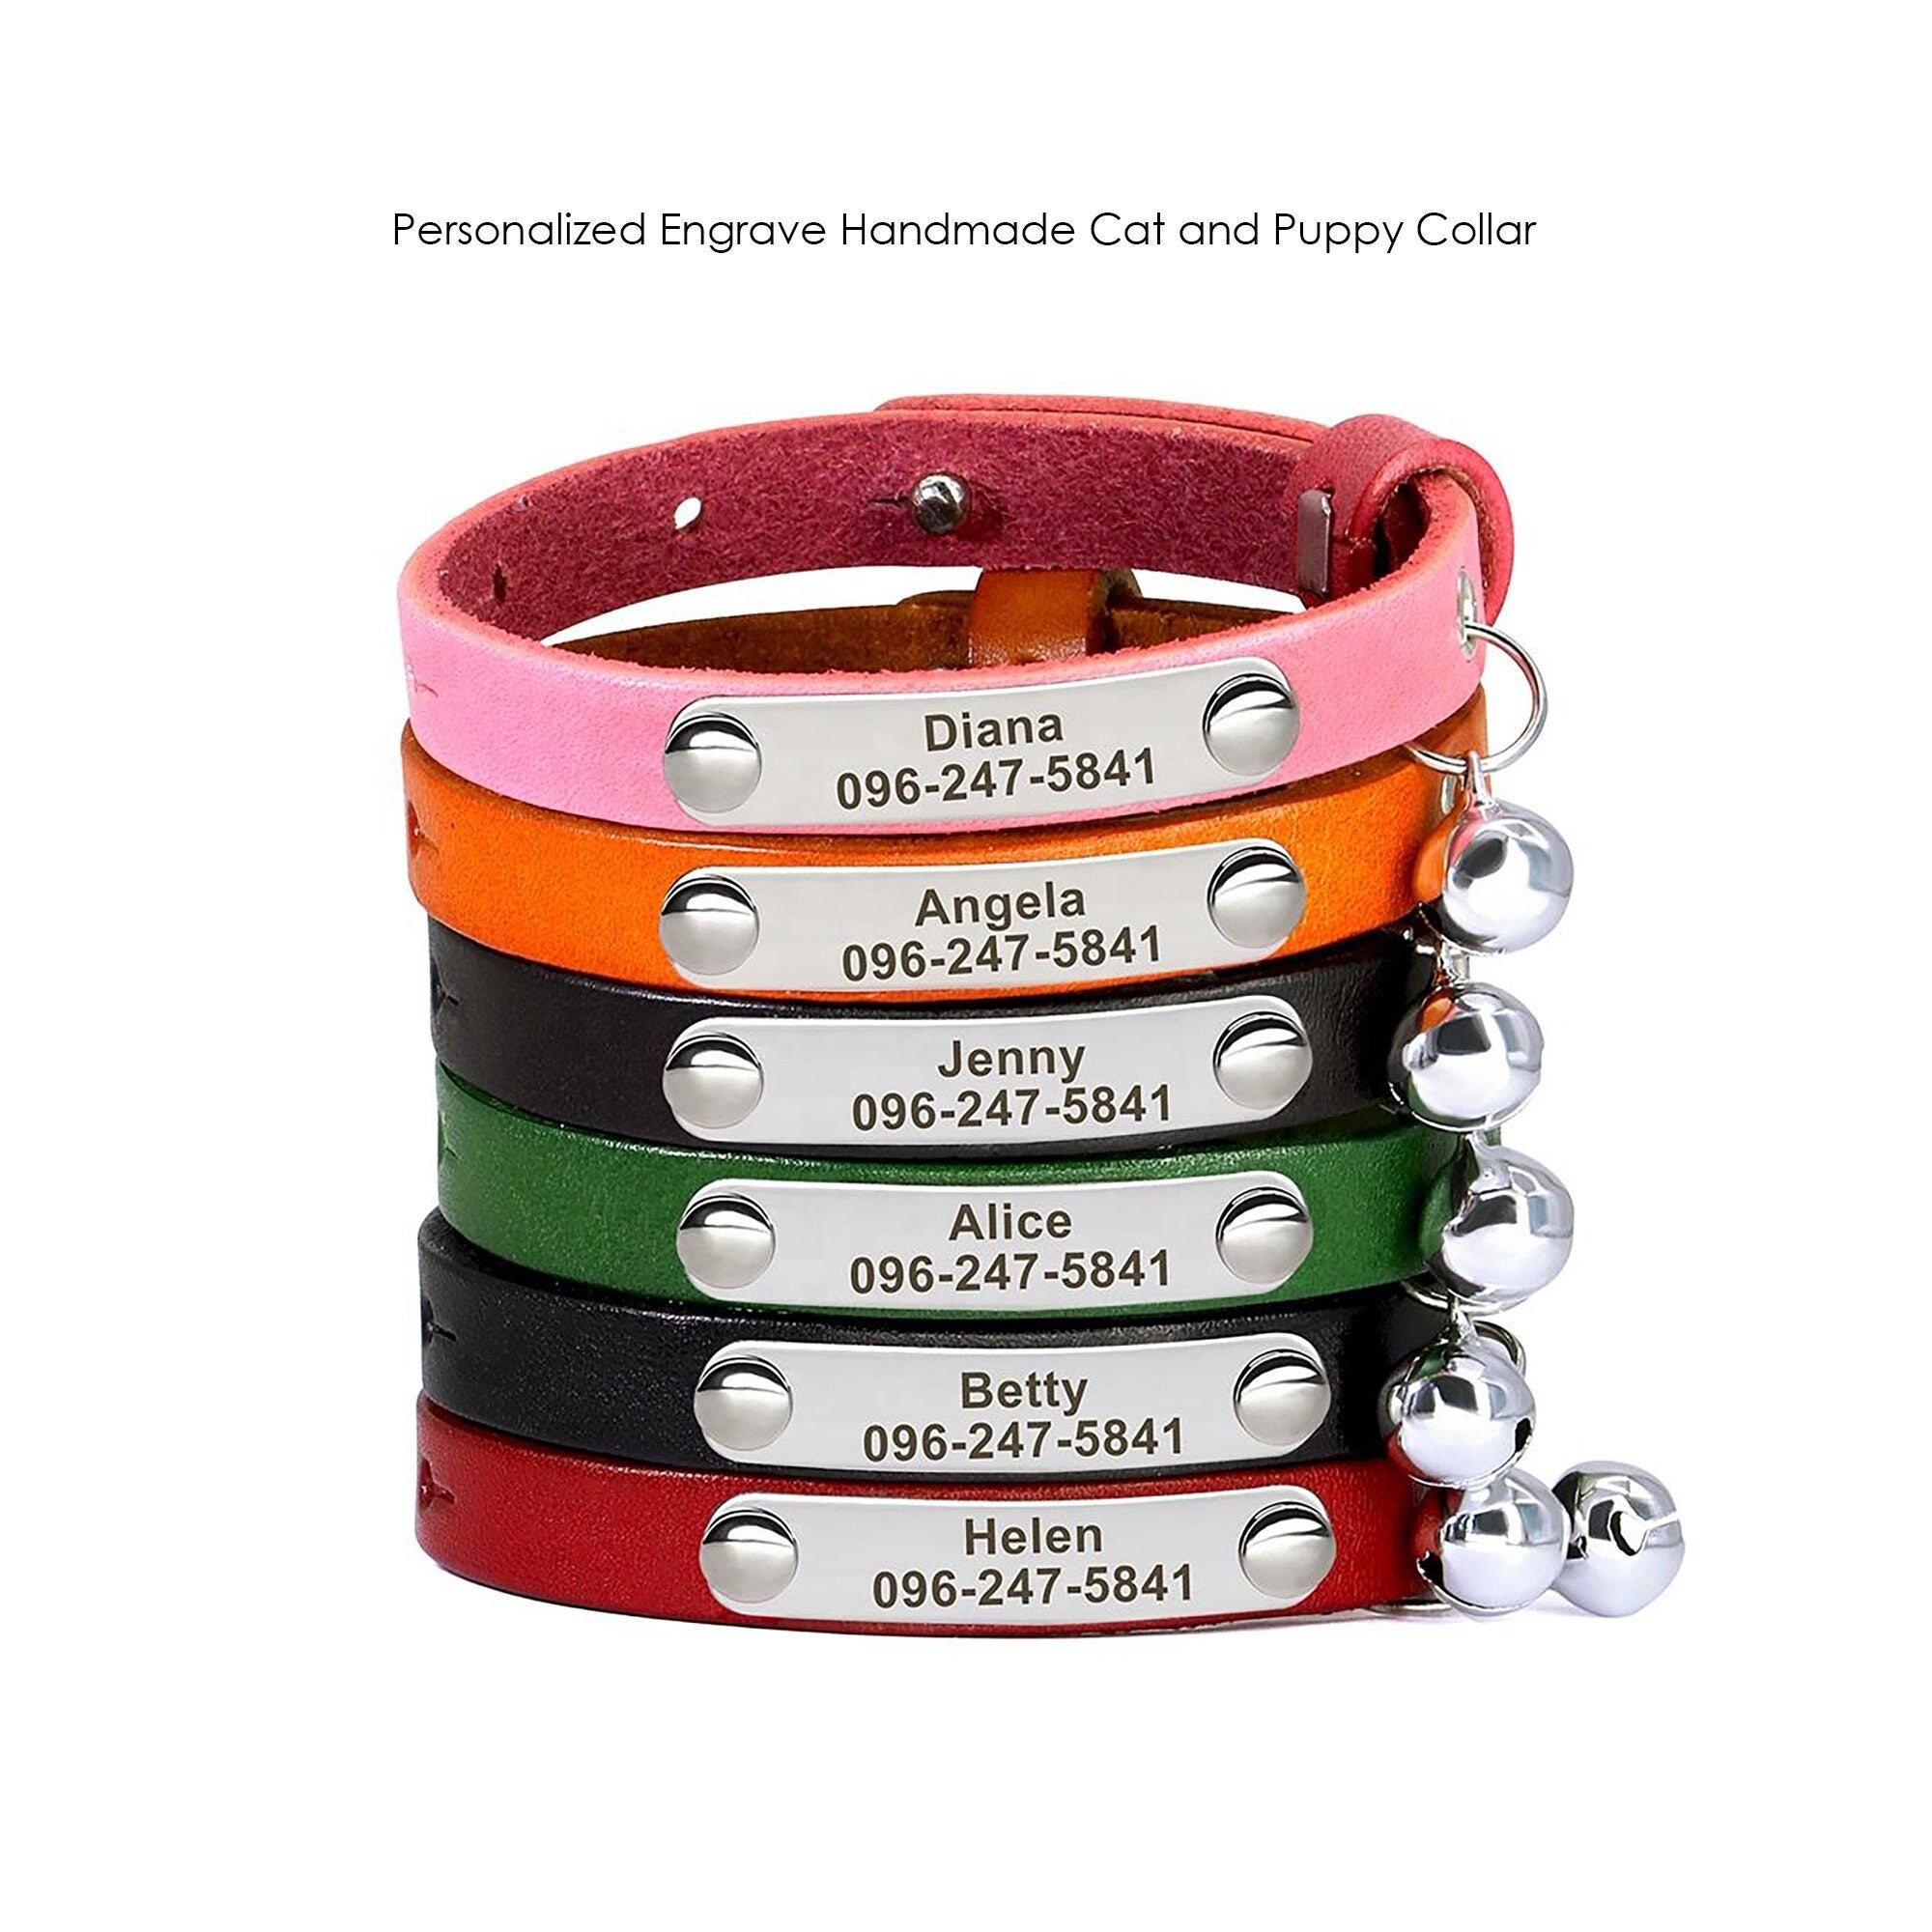 Personalized Engraved Handmade Genuine Leather Cat and Puppy Collar in Black, Green, Red, Yellow, Pink, Brown and Solid Pattern with Bell